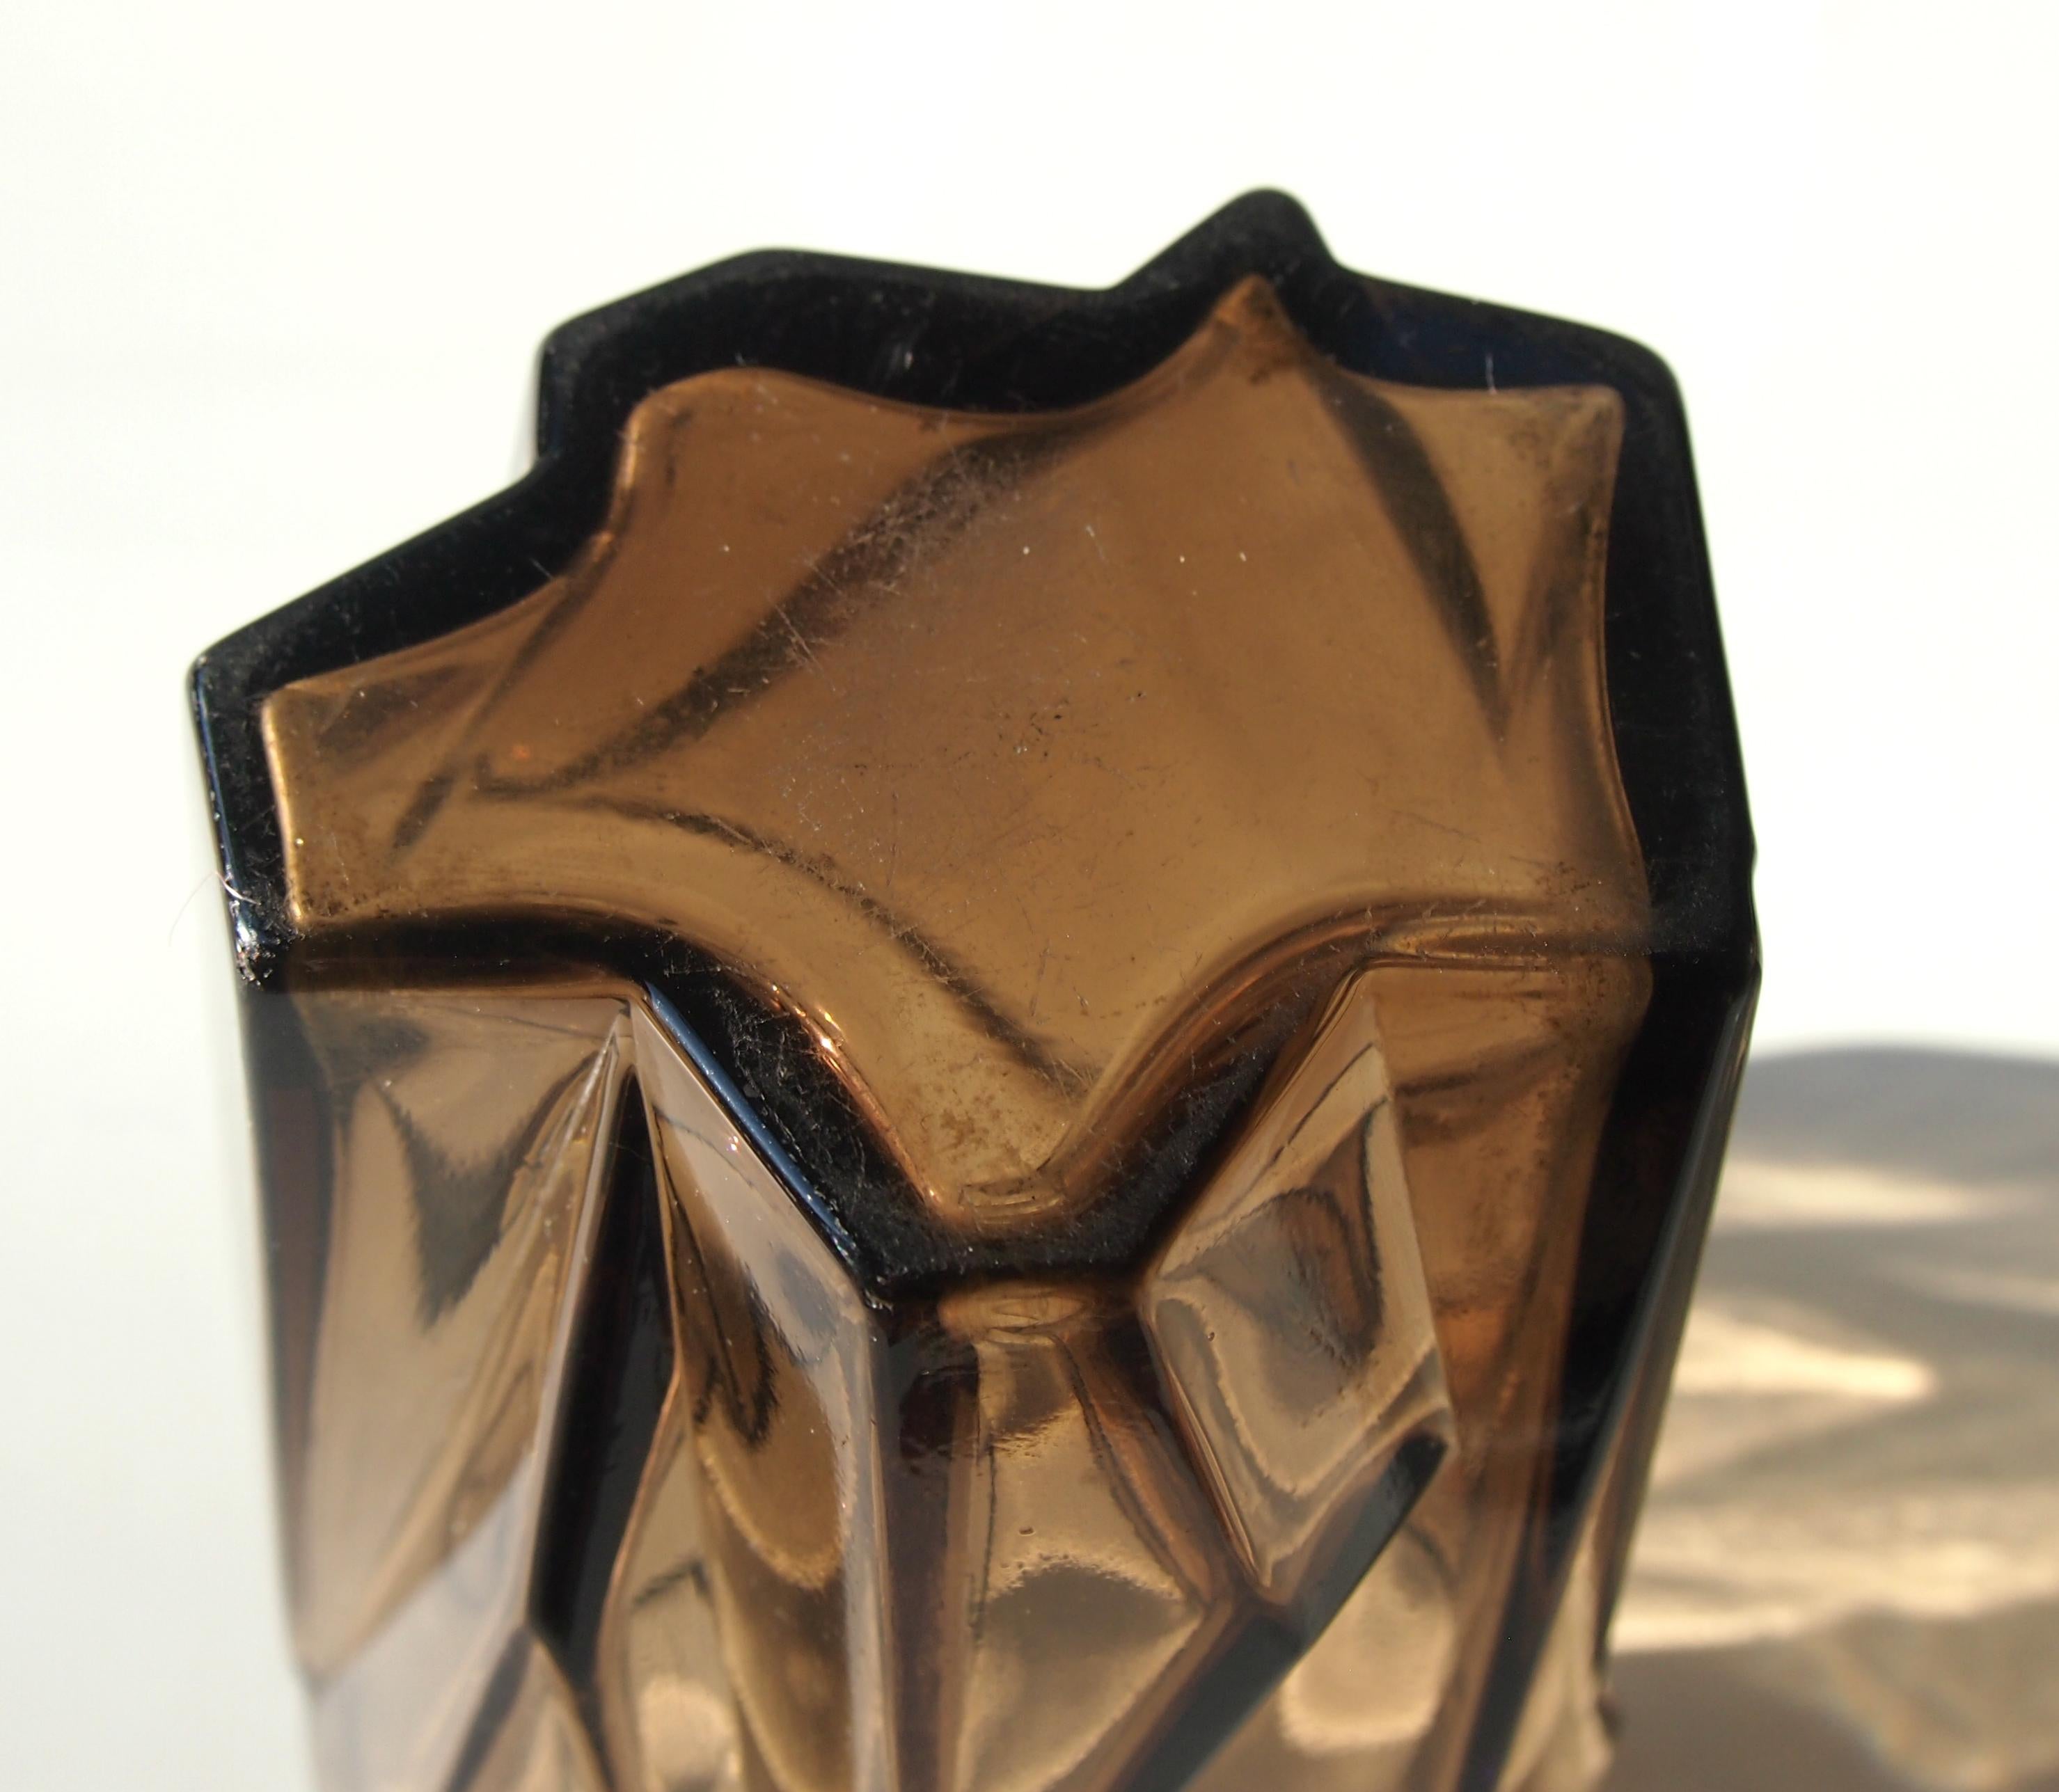 Early 20th Century Topaz Ruba Rombic Art Deco Cubist Glass Vase Made by Consolidated